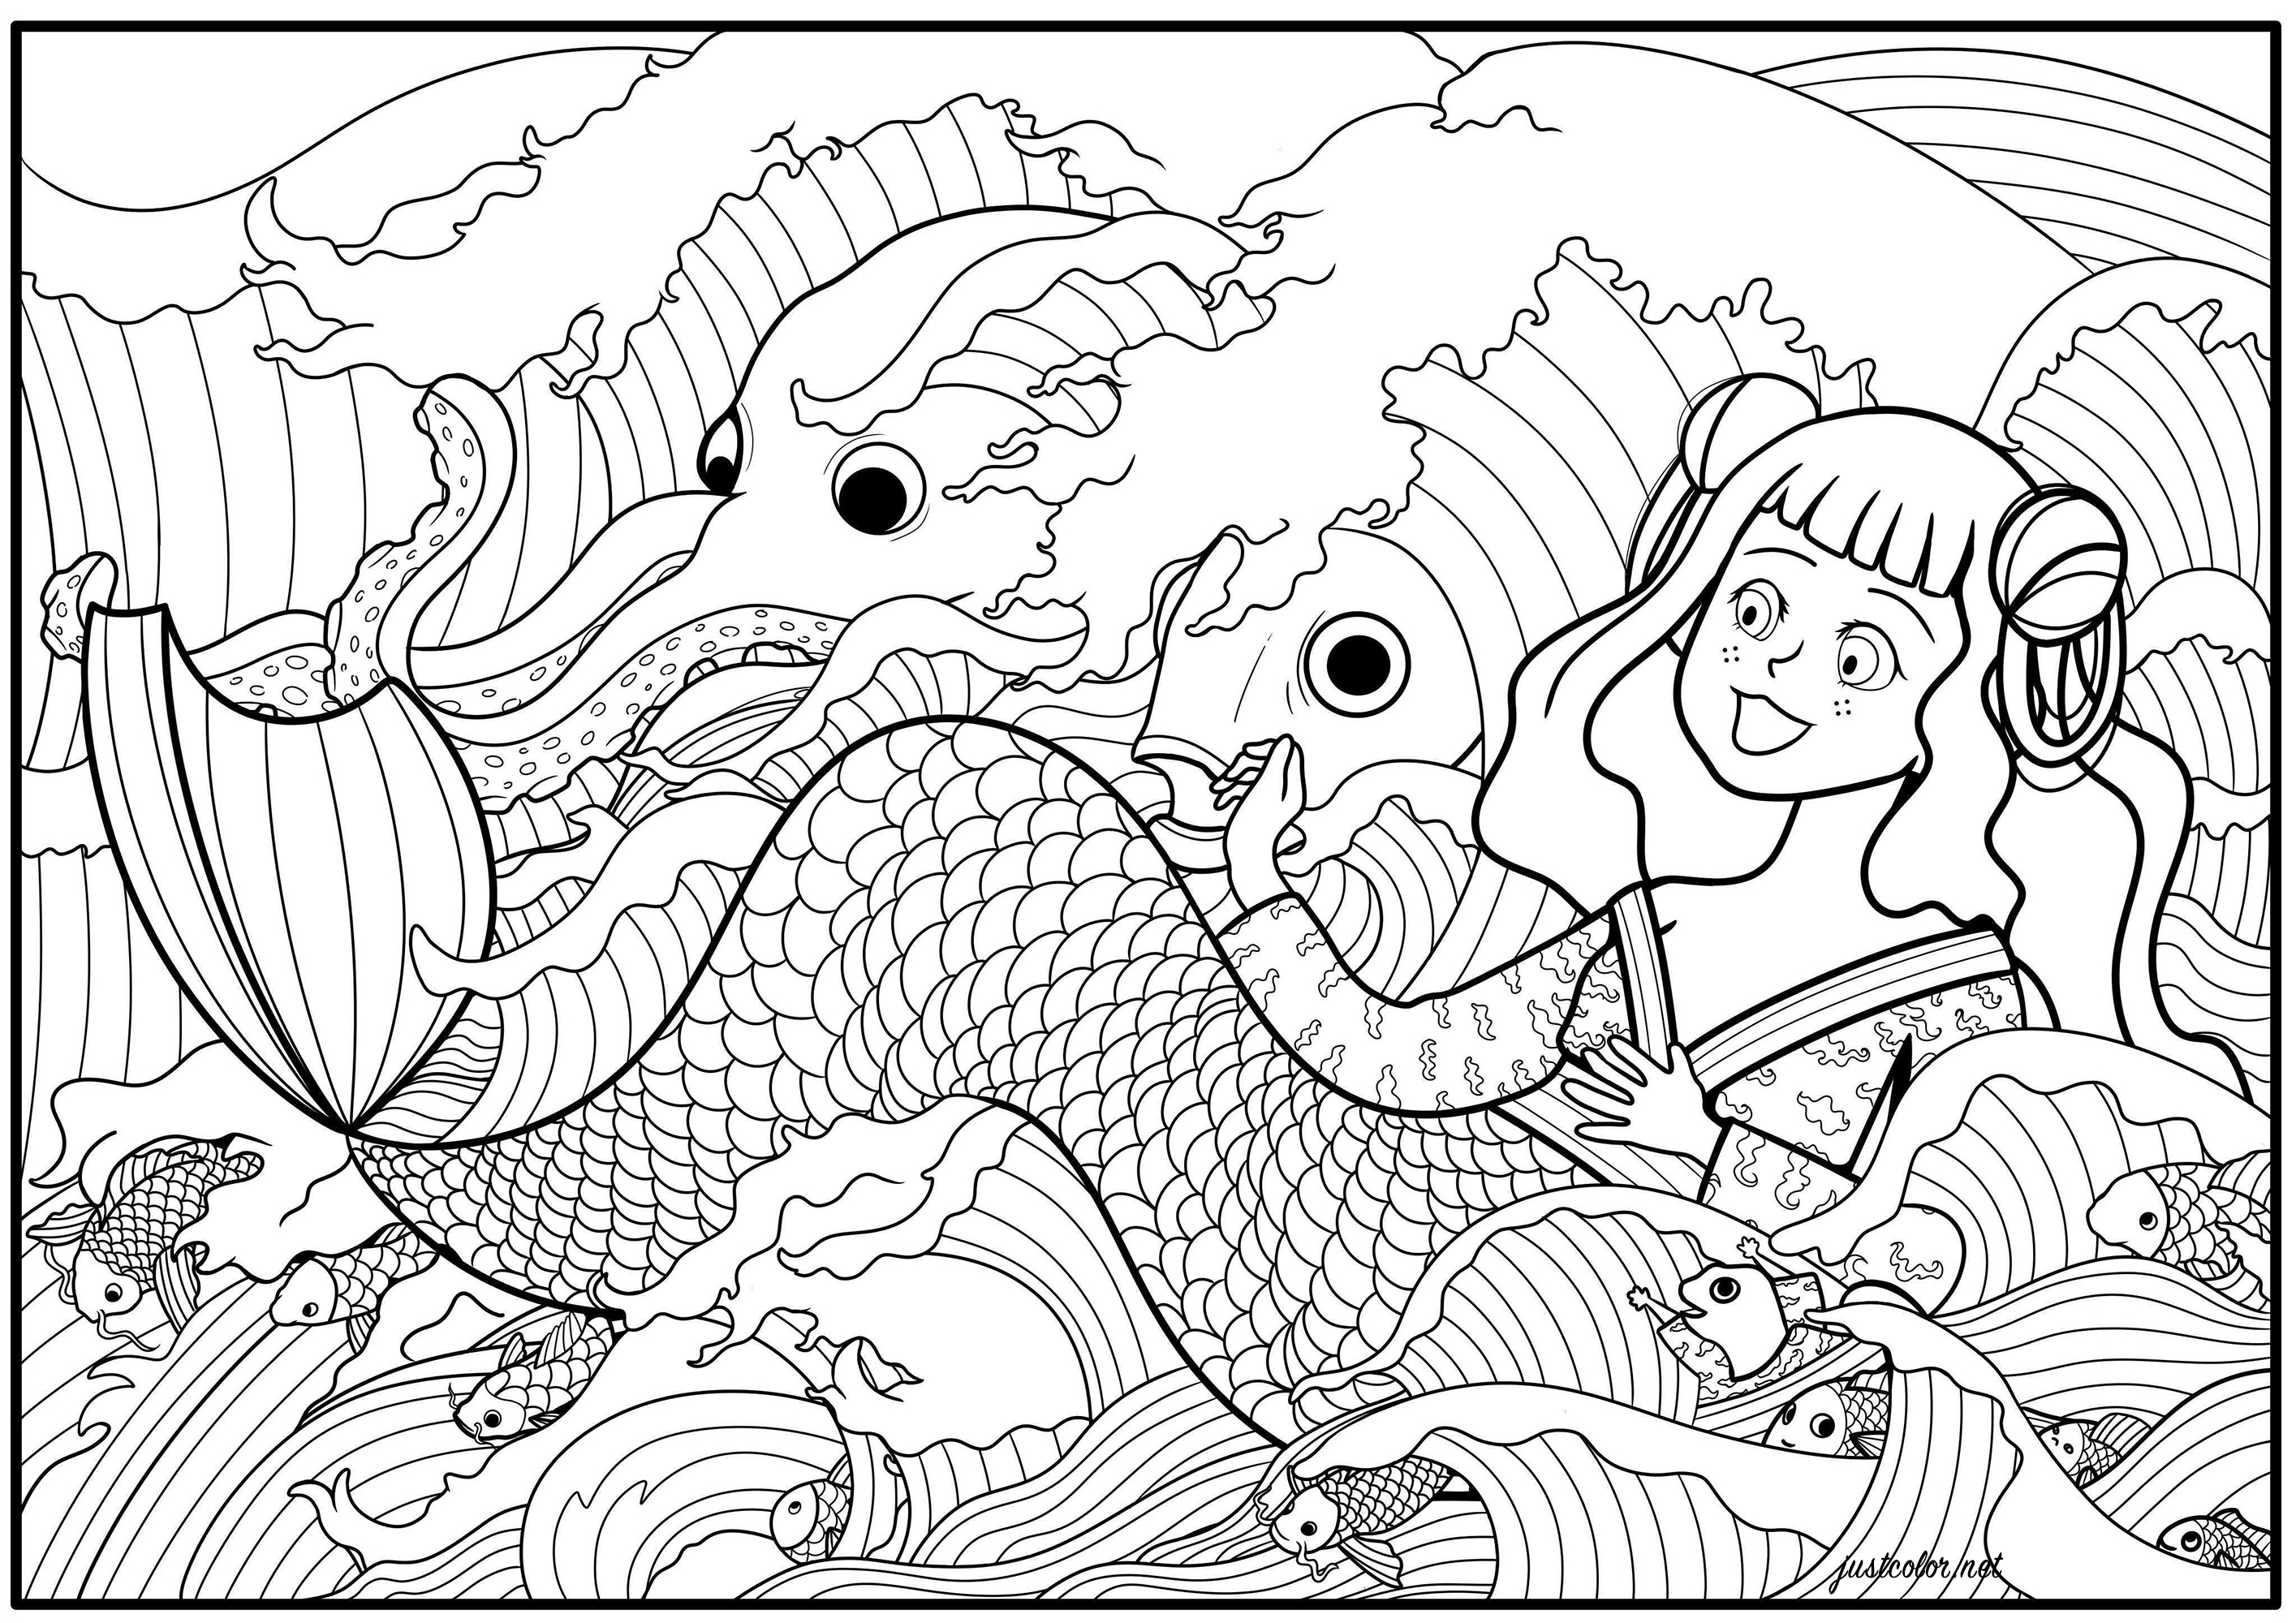 This coloring represents a mermaid surrounded by waves and marines animals.  This is a reinterpretation of an illustration by Benjamin Lacombe